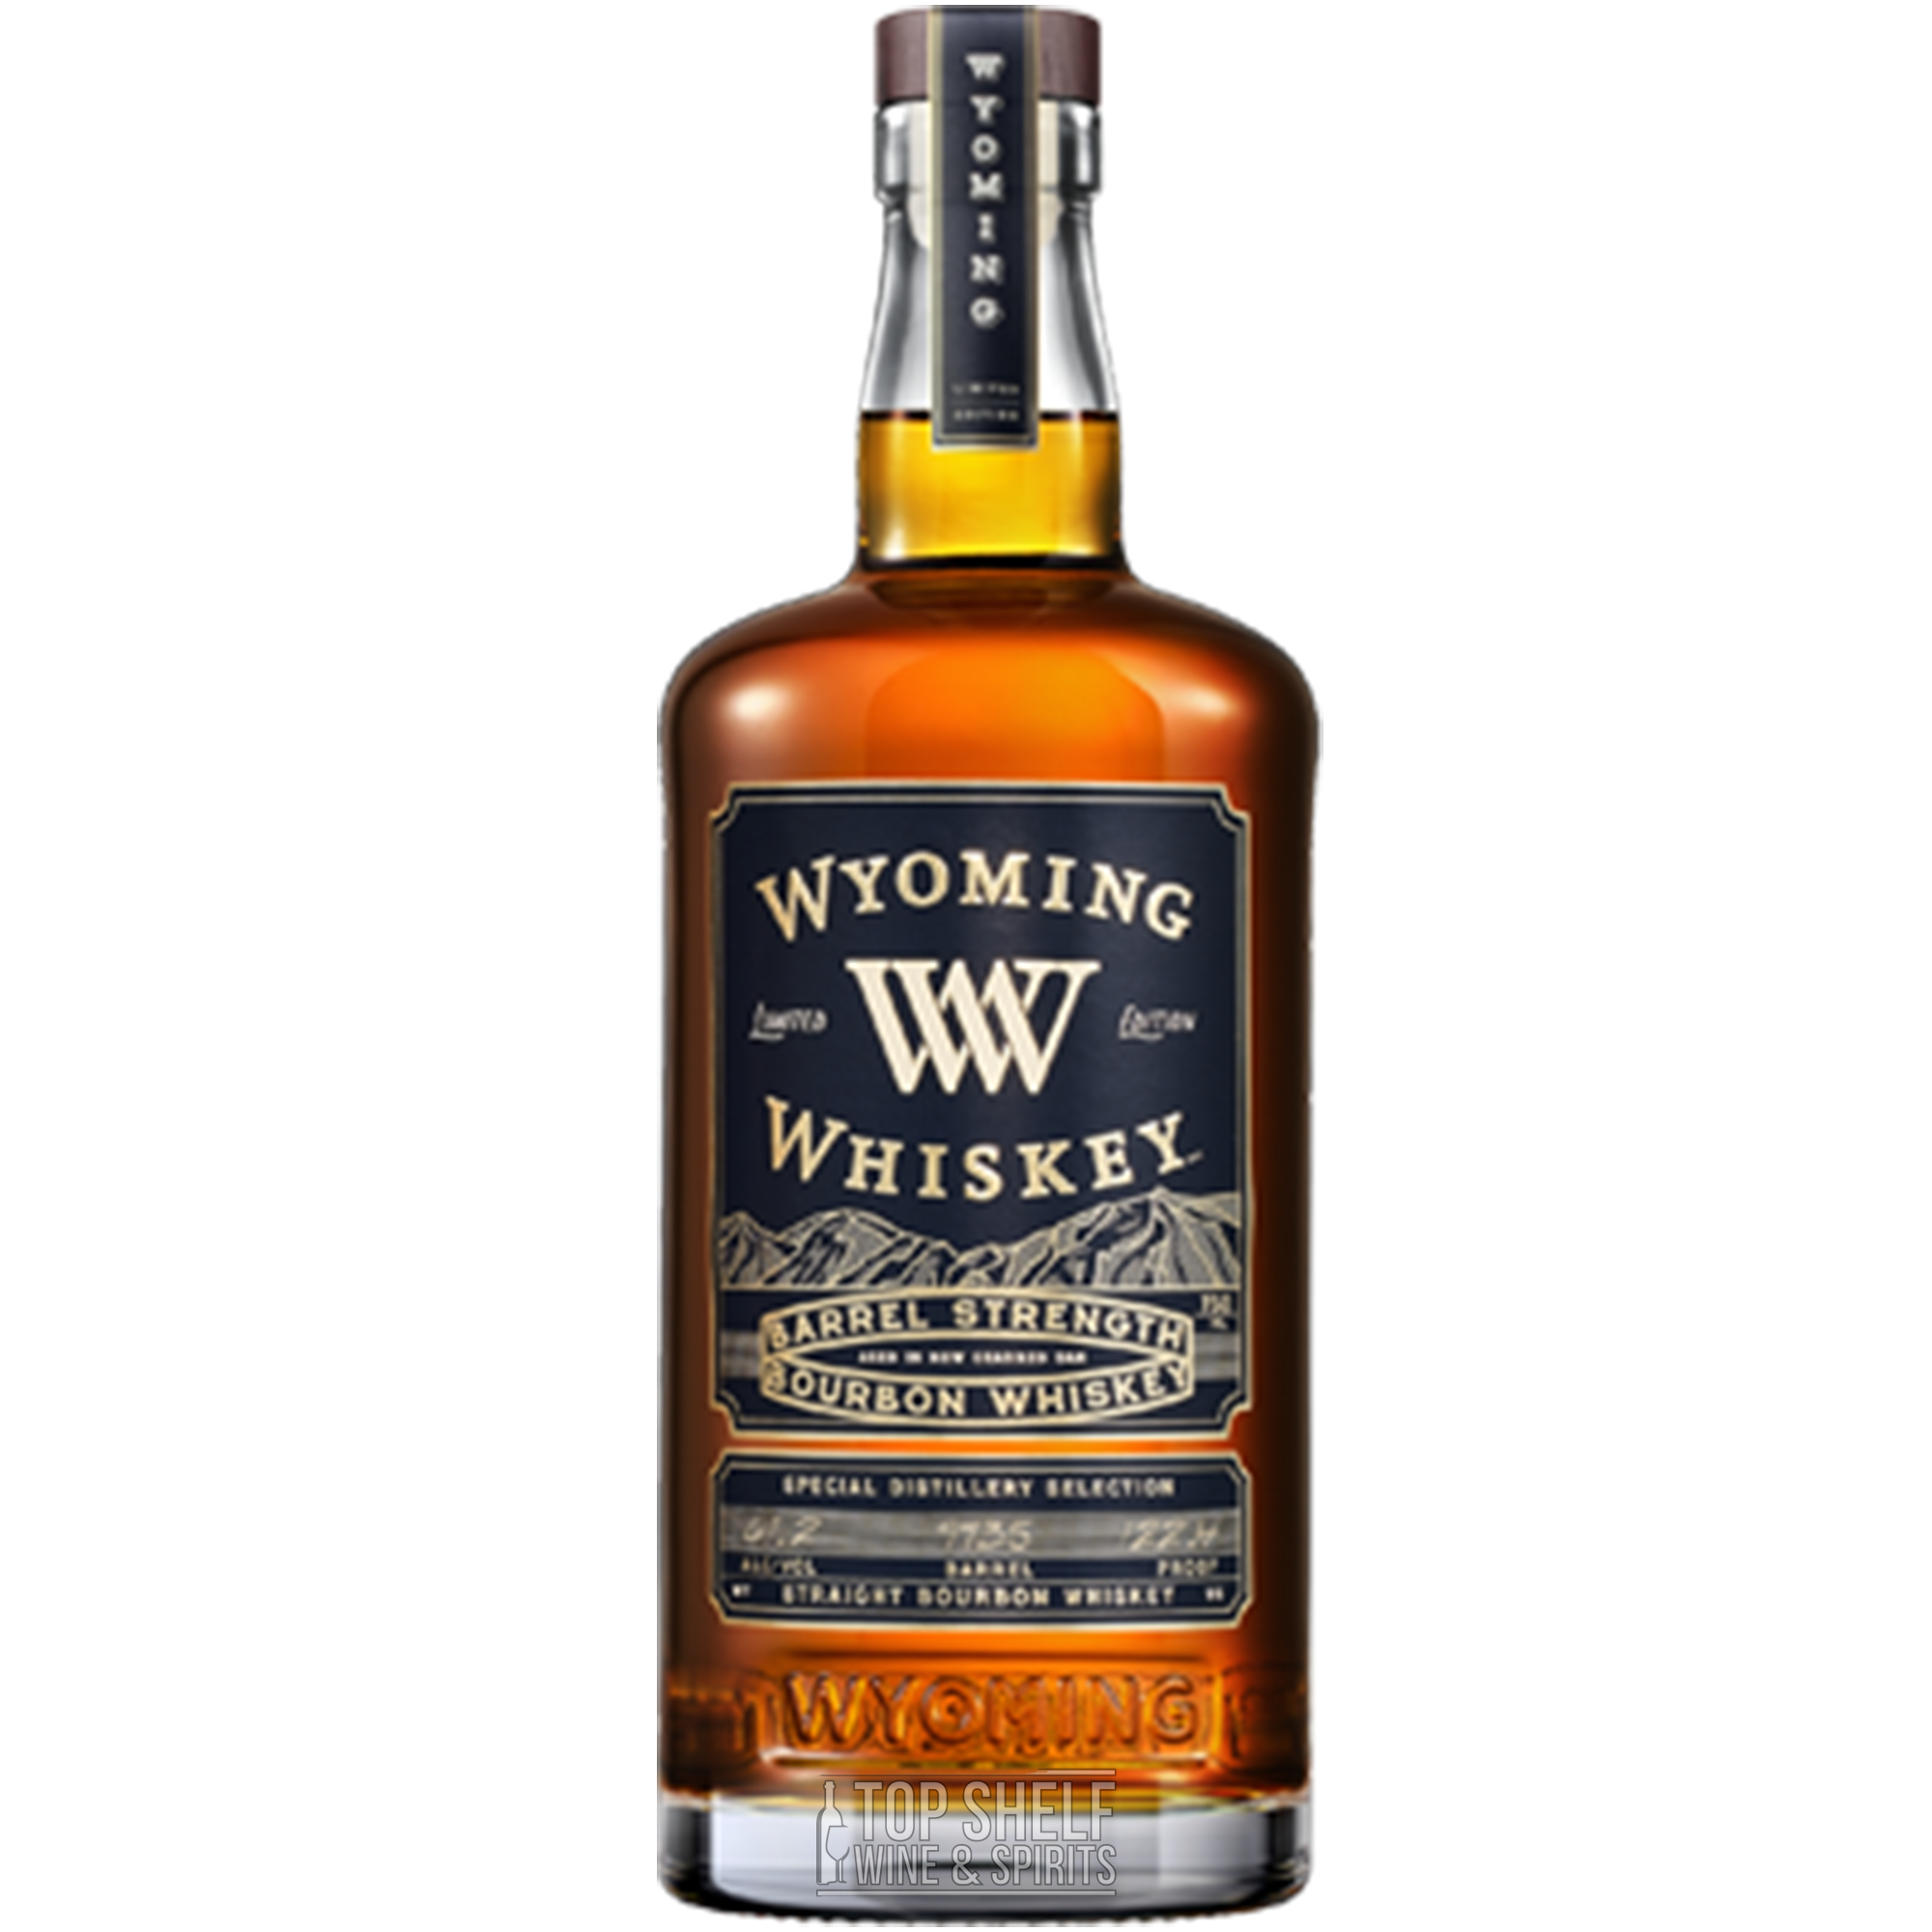 Wyoming Whiskey Barrel Strength Limited Edition Bourbon